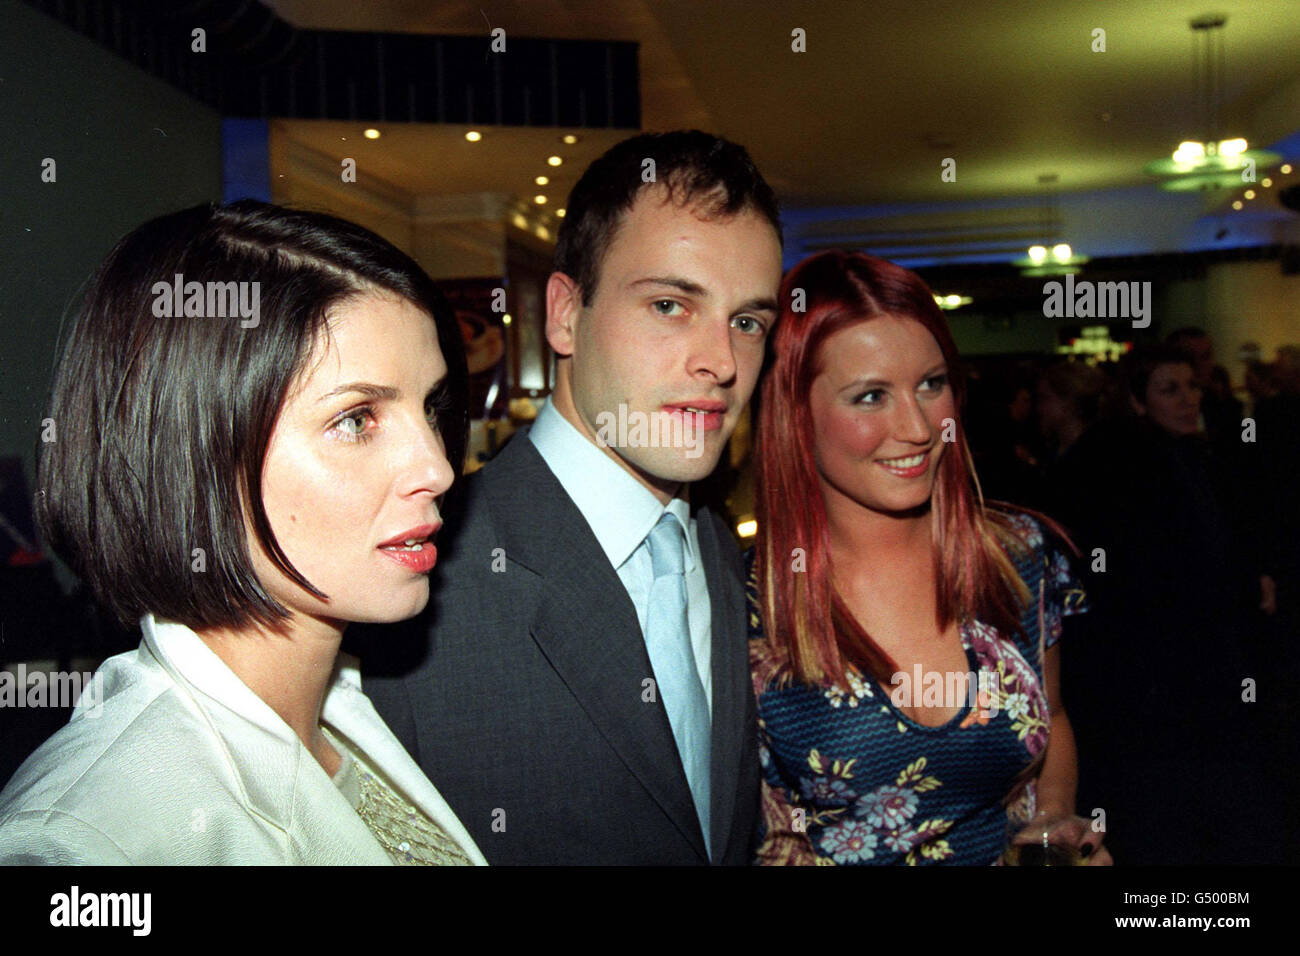 Actresses Sadie Frost (L) and Denise van Outen (R), who star in the film, with actor Johnny Lee Miller arriving for the world premiere of 'Love, Honour & Obey', at the Camden Odeon cinema in west London. Stock Photo